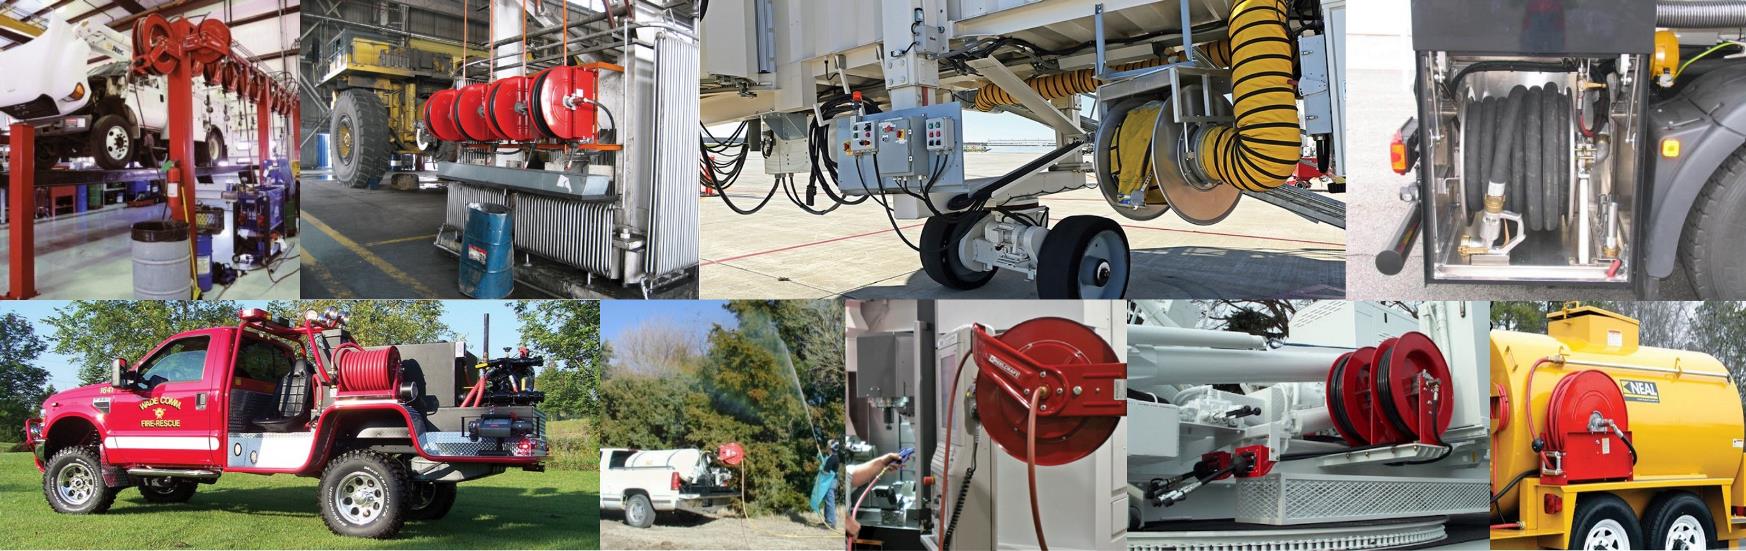 We Distribute a Wide Range of Quality Reels
Designed for Your Mobile or Industrial Equipments.

AIR, WATER, OILS, GREASE, CHEMICALS, ELECTRICITY, HYDRAULICS
